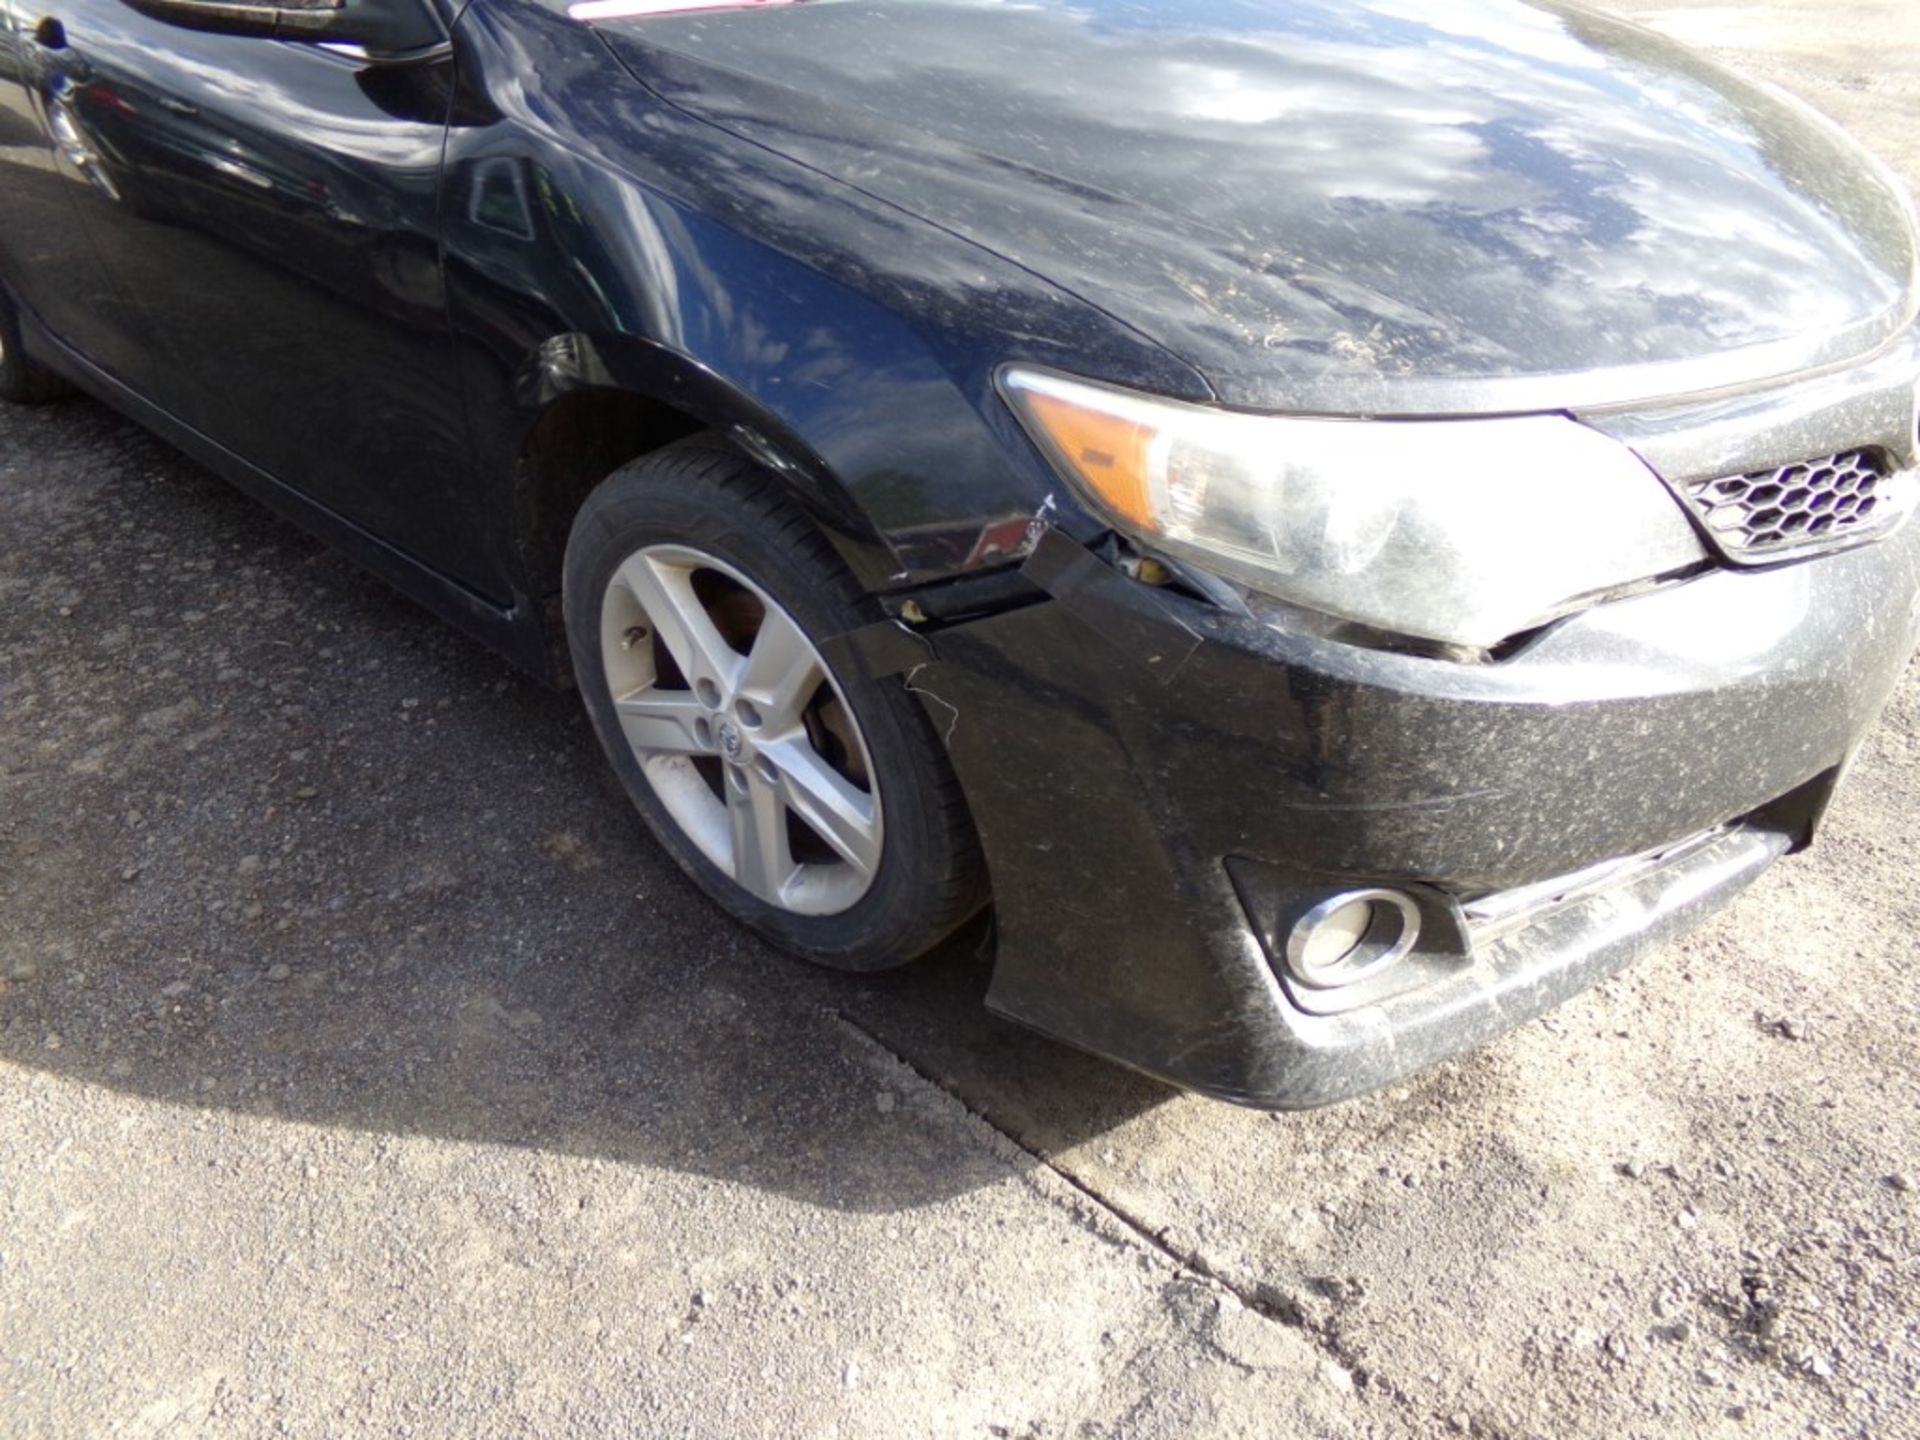 2014 Toyota Camry, Black, Auto Trans., Leather, 199K Miles, CONDITION UNKNOWN-NOT RUNNING-NEEDS - Image 4 of 10